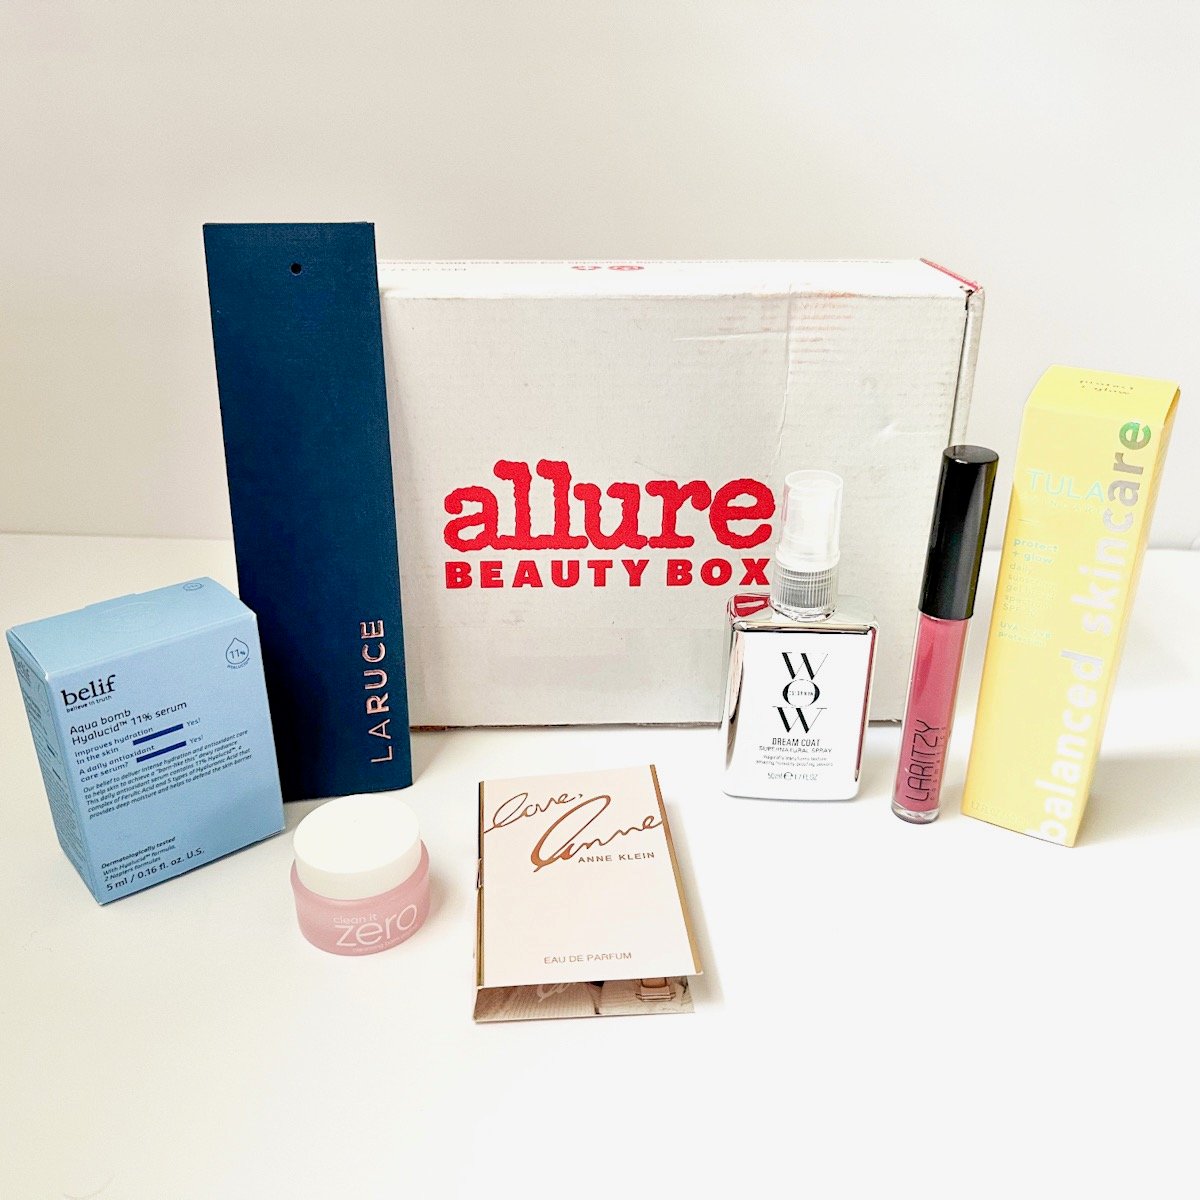 Allure Beauty Box Reviews Everything You Need To Know